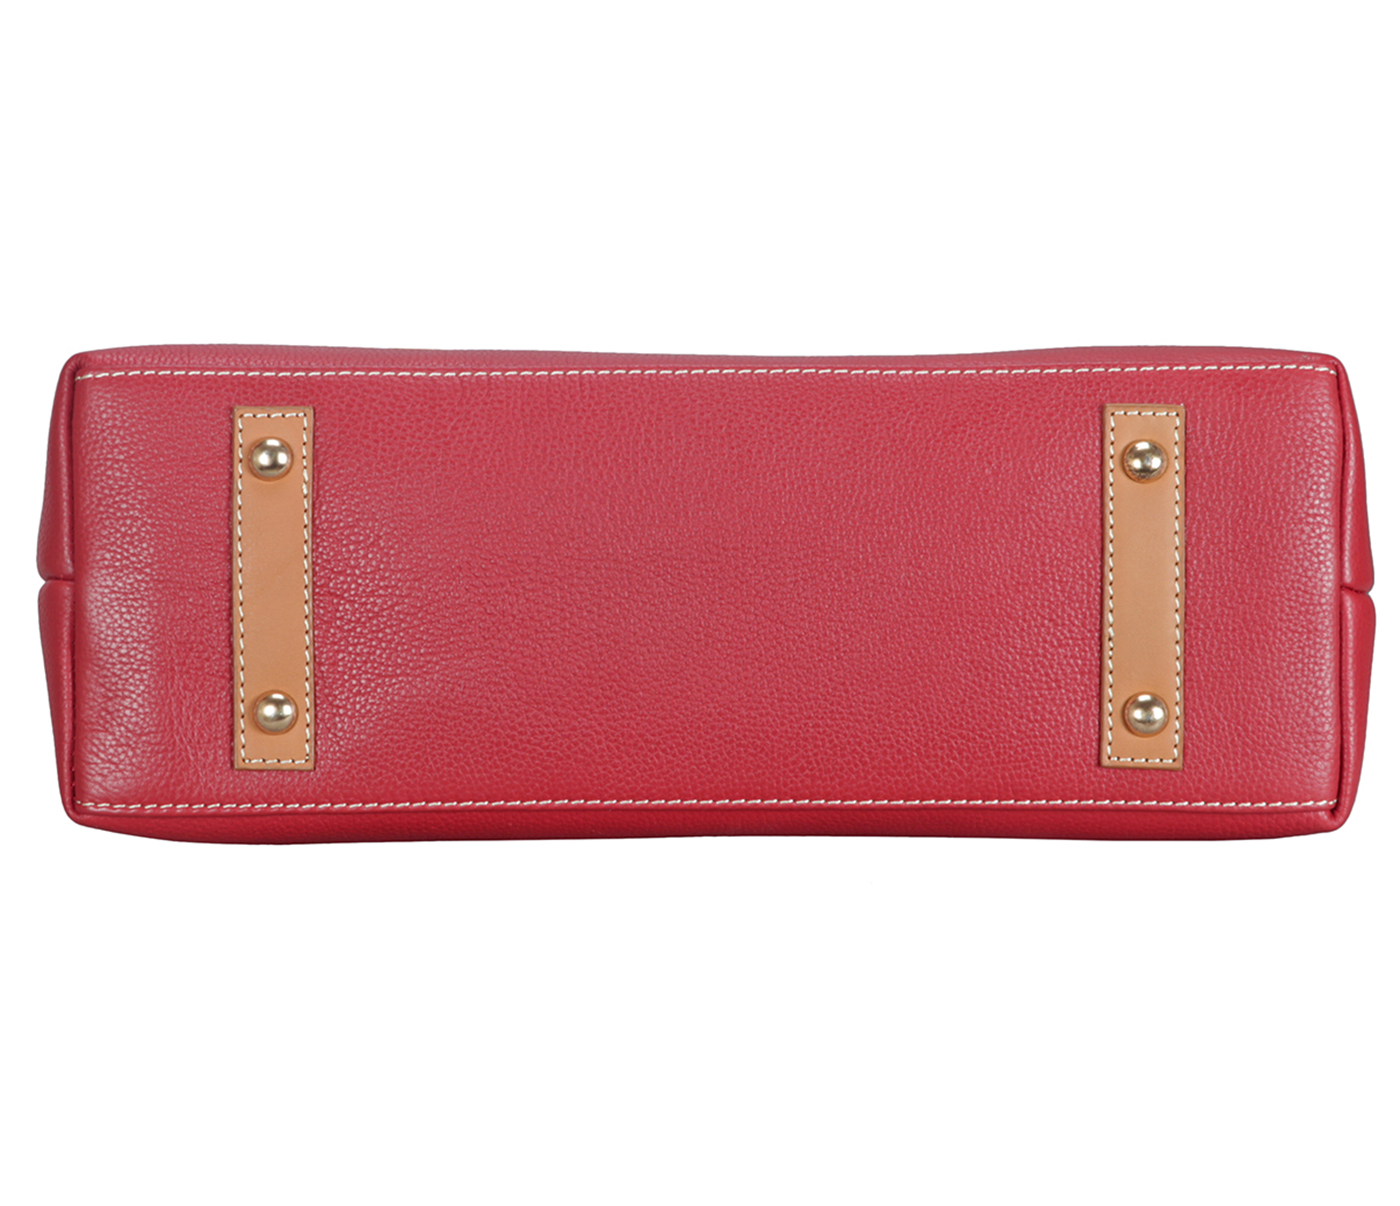 B837-Karla-Double handle Shoulder bag in Genuine Leather - Red